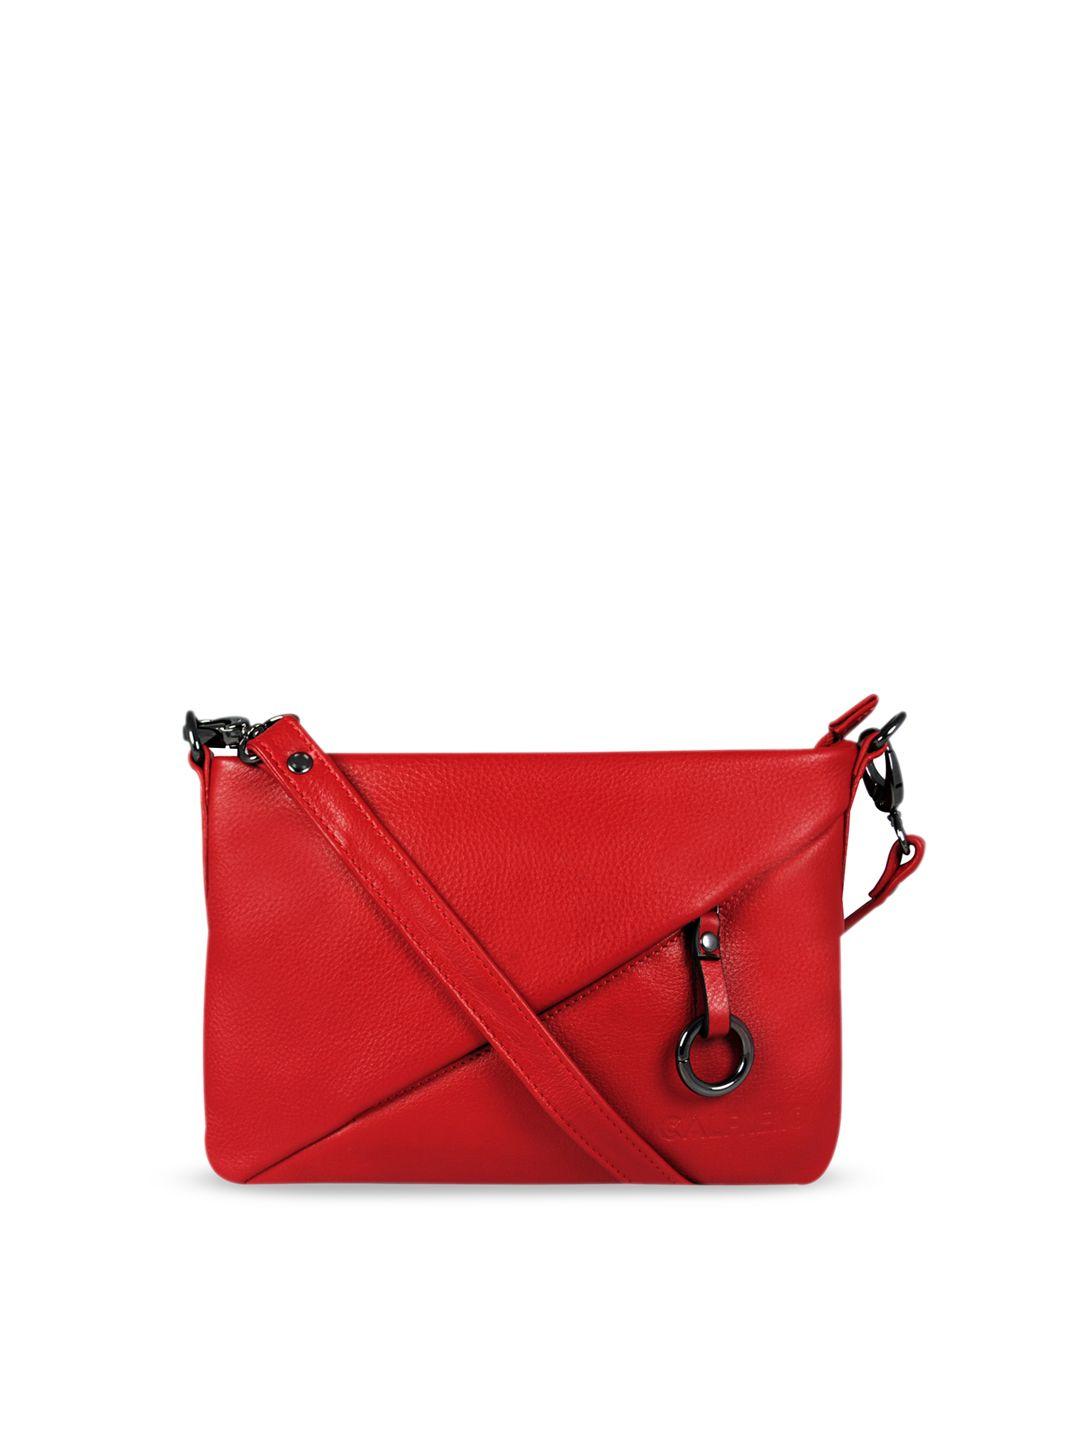 calfnero women red leather sling bag